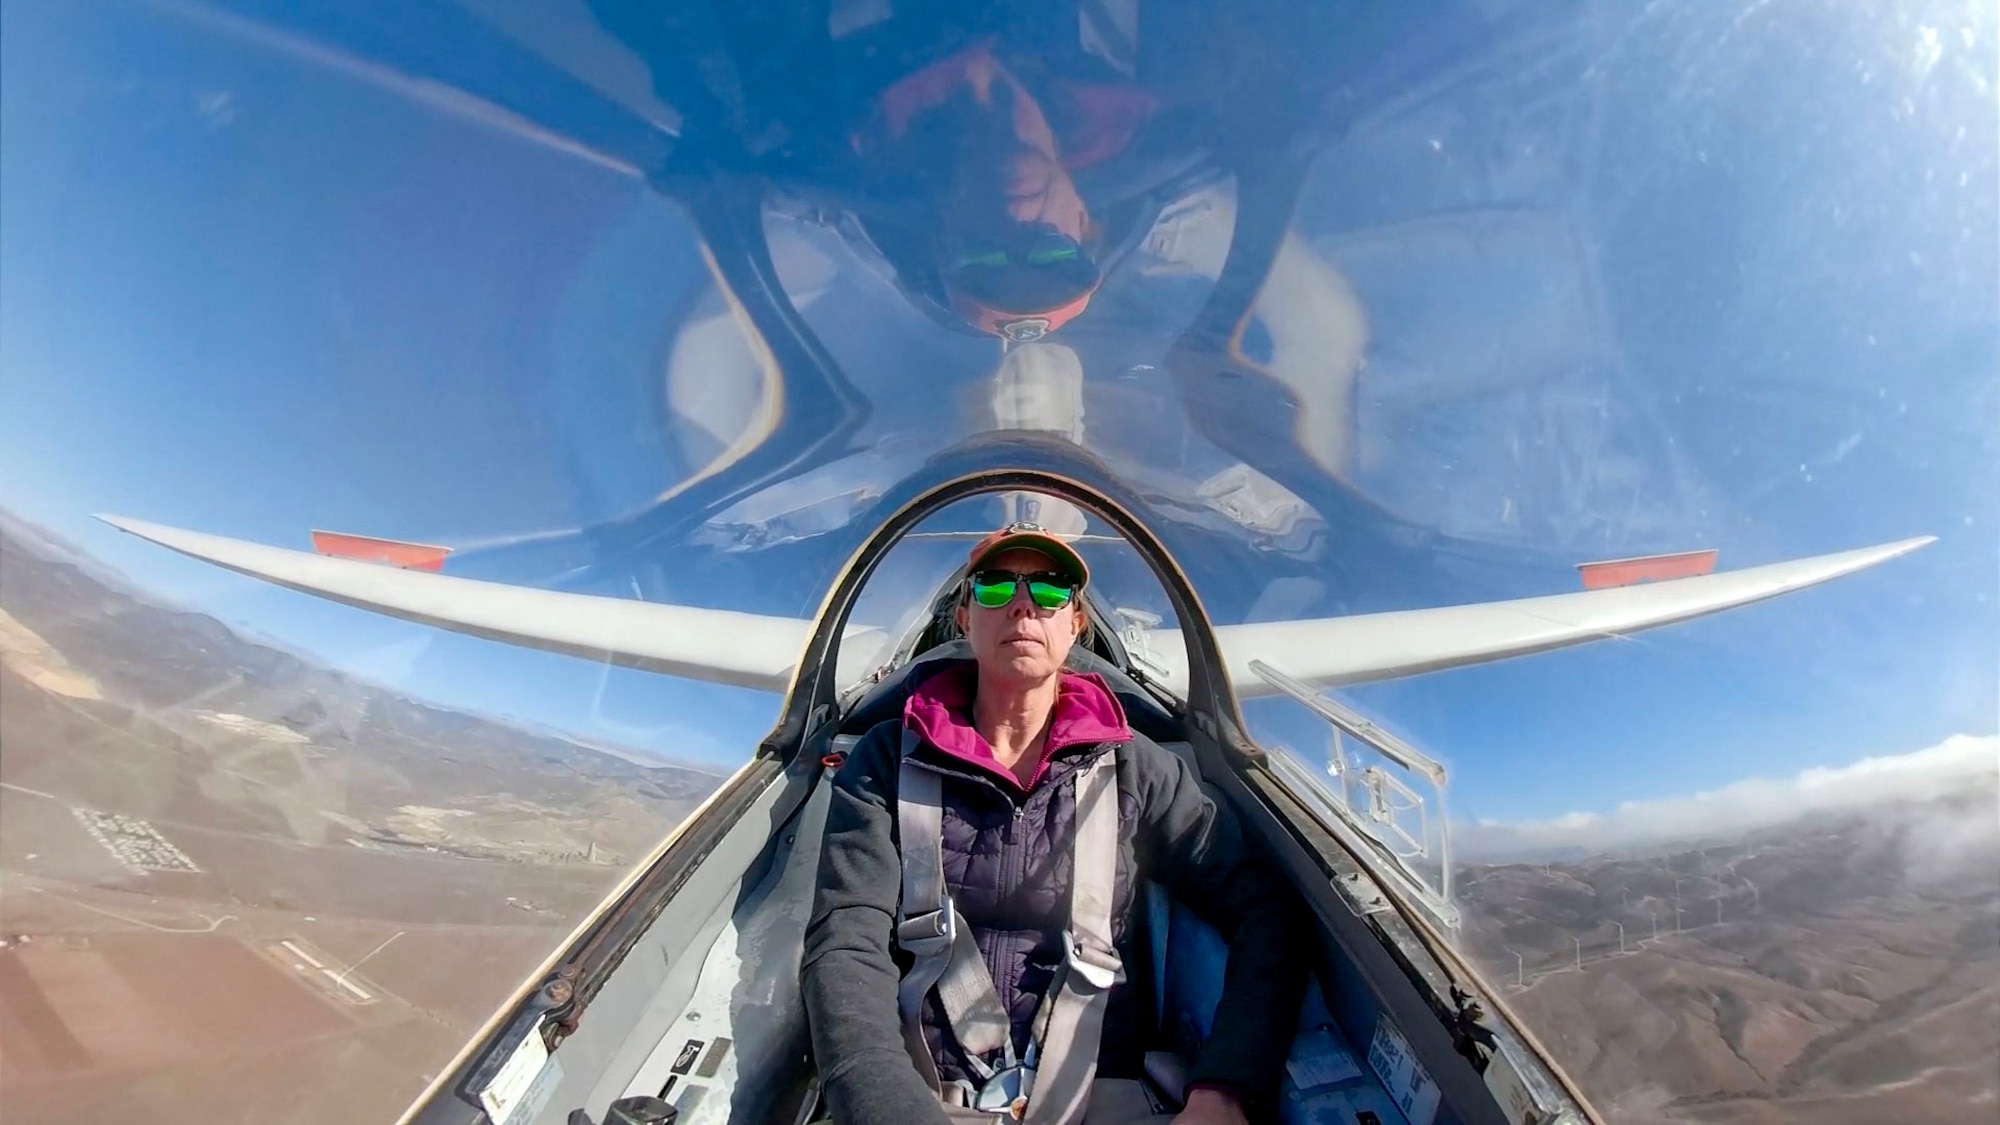 Jessica "Sting" Peterson, Technical Director, 412th Operations Group flies on a glider as part of the Space Test Course. To celebrate National Engineering Week, the United States Air Force Test Pilot School based at Edwards Air Force Base went to Tehachapi, California to fly mountain gliders to simulate space shuttle approaches as part of the course.